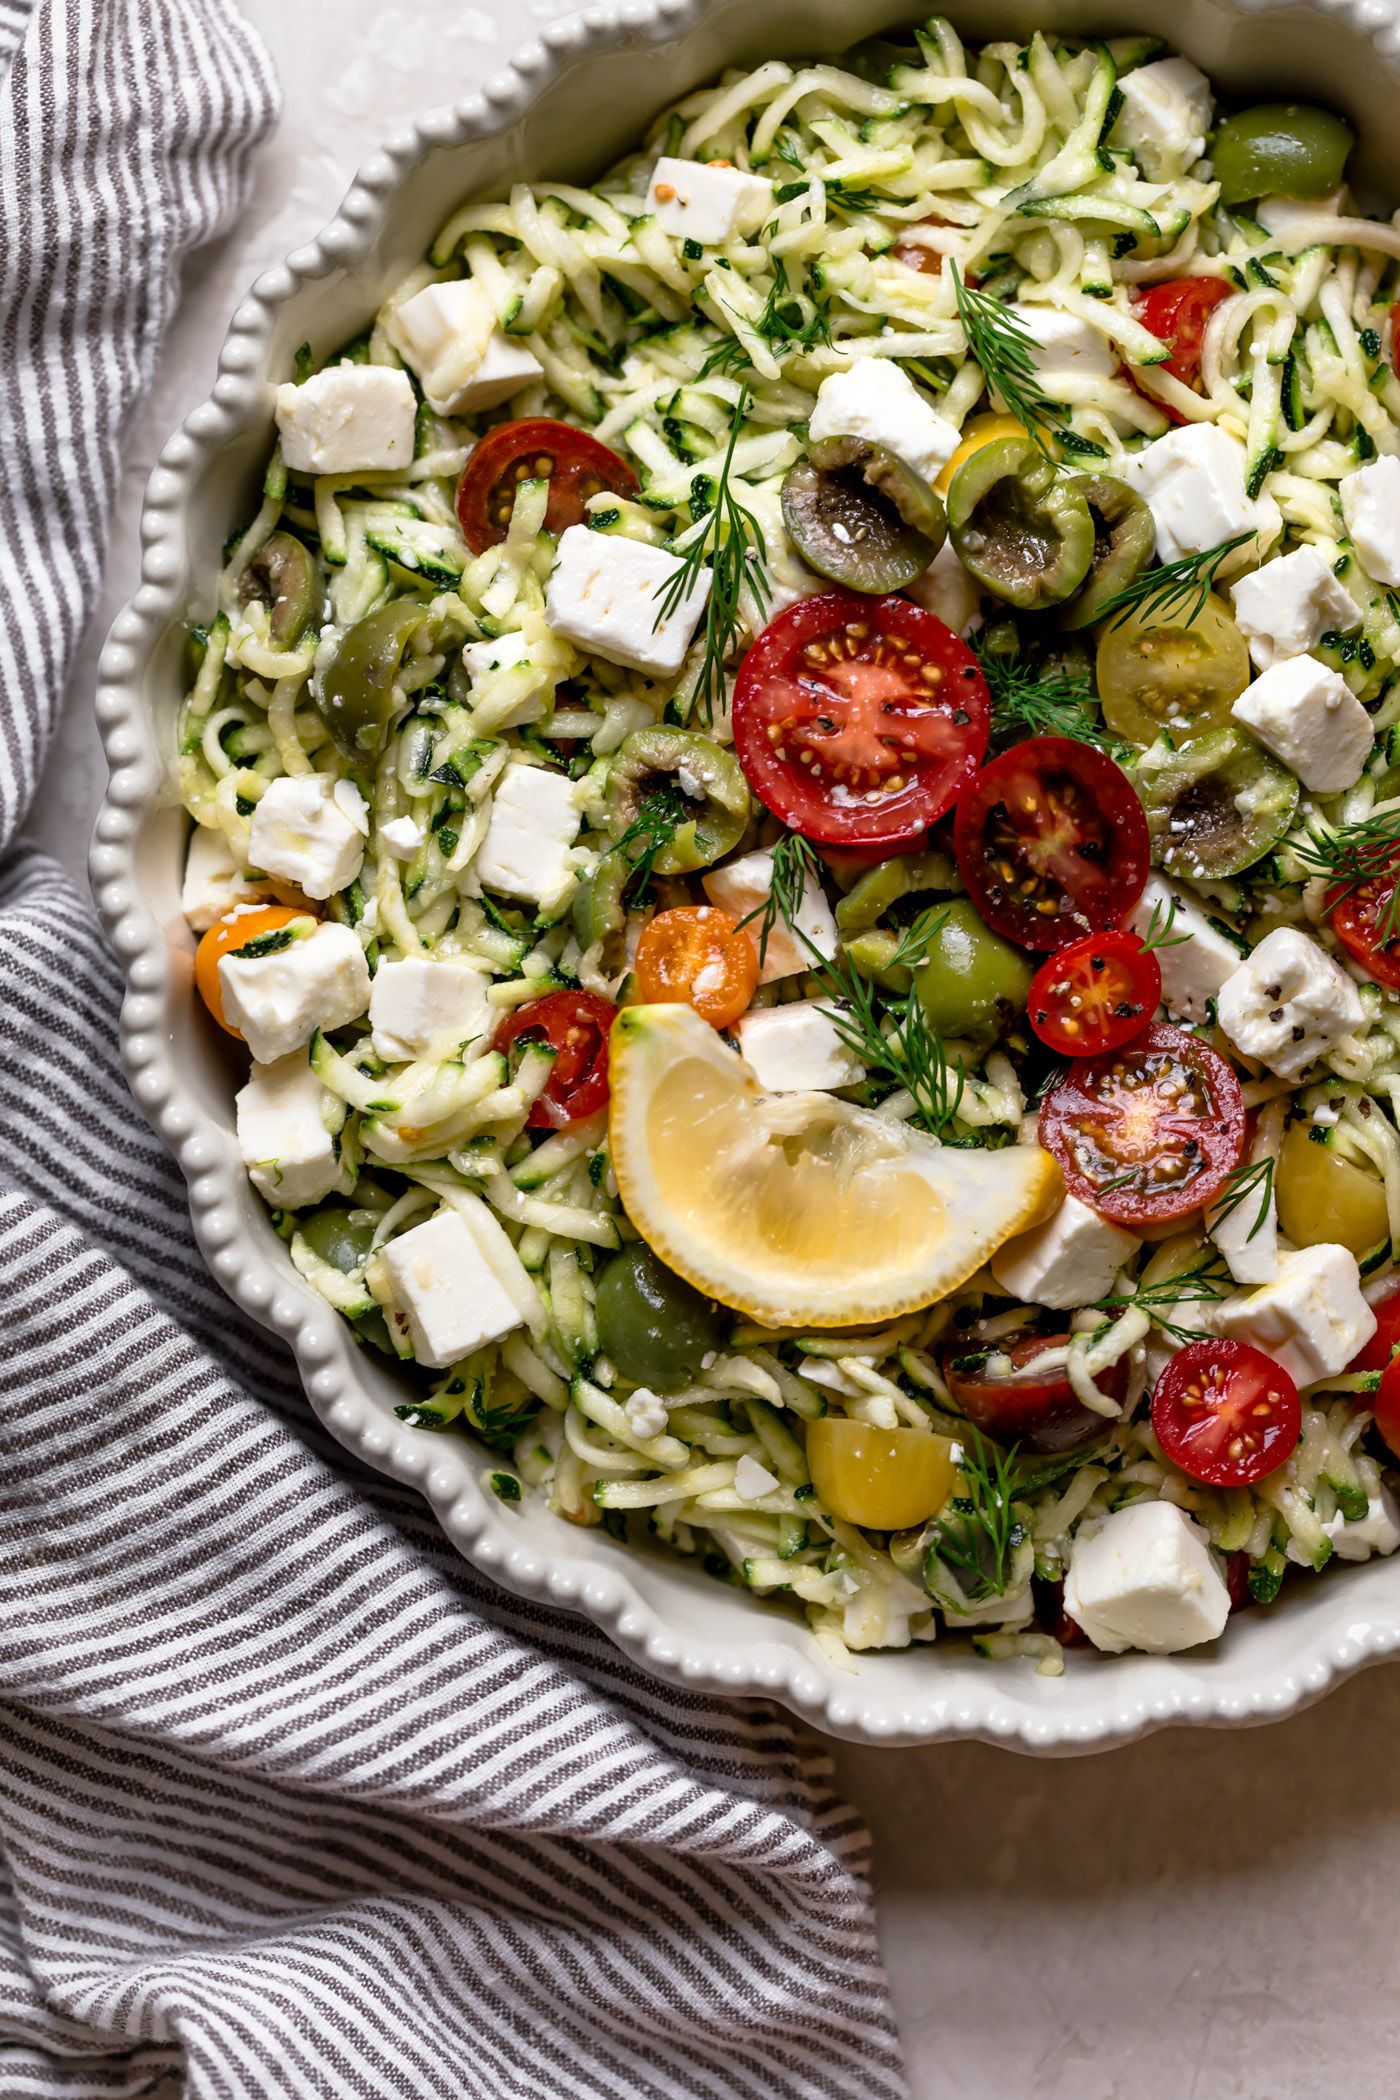 a fresh, fast, & light summertime grated zucchini salad! this easy salad has simple summer ingredients like shredded zucchini, tomatoes, castelvetrano olives, & tangy feta cheese. great for an easy weeknight dinner or side dish, or perfect for feeding a crowd at summer parties & BBQs! vegetarian, naturally gluten-free, low-carb, raw, totally healthy & fresh! #playswellwithbutter #zucchinisalad #gratedzucchini #zucchinirecipe #shreddedzucchini #summersalad #sidedish #rawsalad #lowcarbrecipe